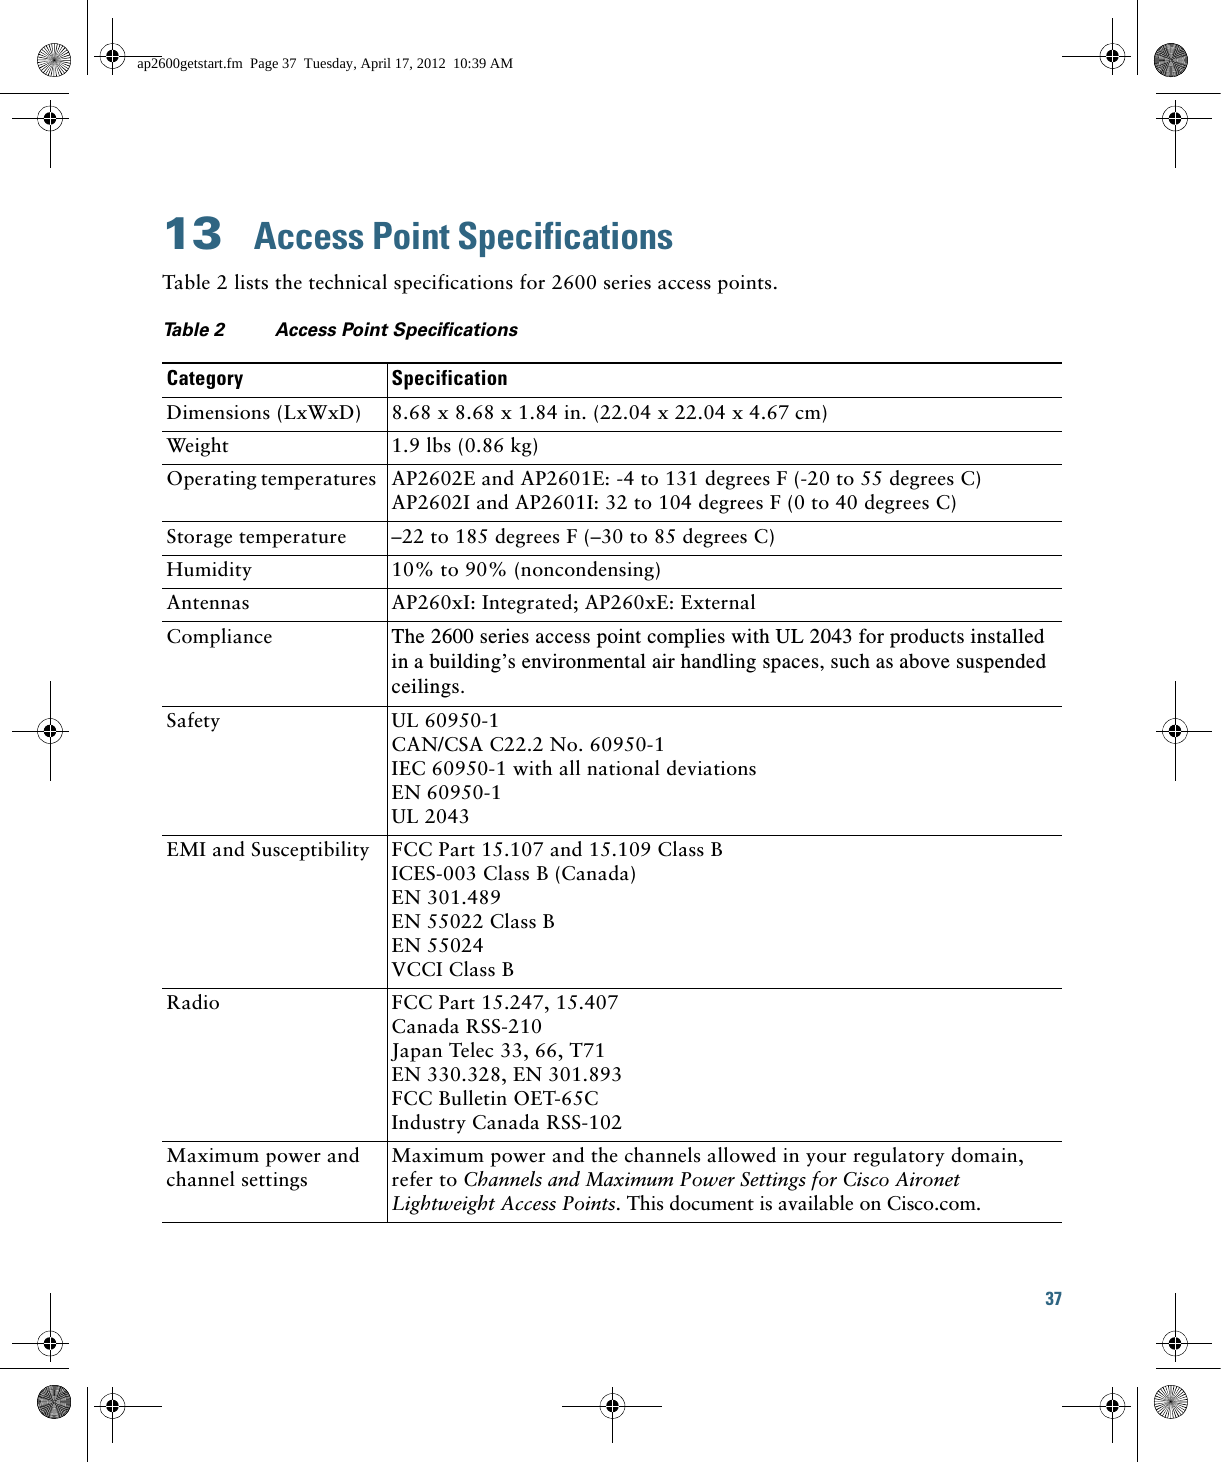 37 13  Access Point SpecificationsTable 2 lists the technical specifications for 2600 series access points.Ta b l e  2 Access Point Specifications  Category SpecificationDimensions (LxWxD) 8.68 x 8.68 x 1.84 in. (22.04 x 22.04 x 4.67 cm) Weight 1.9 lbs (0.86 kg)Operating temperatures AP2602E and AP2601E: -4 to 131 degrees F (-20 to 55 degrees C)AP2602I and AP2601I: 32 to 104 degrees F (0 to 40 degrees C)Storage temperature –22 to 185 degrees F (–30 to 85 degrees C)Humidity 10% to 90% (noncondensing)Antennas AP260xI: Integrated; AP260xE: ExternalCompliance The 2600 series access point complies with UL 2043 for products installed in a building’s environmental air handling spaces, such as above suspended ceilings.Safety UL 60950-1CAN/CSA C22.2 No. 60950-1IEC 60950-1 with all national deviationsEN 60950-1UL 2043EMI and Susceptibility FCC Part 15.107 and 15.109 Class BICES-003 Class B (Canada)EN 301.489EN 55022 Class B EN 55024VCCI Class BRadio FCC Part 15.247, 15.407Canada RSS-210Japan Telec 33, 66, T71EN 330.328, EN 301.893FCC Bulletin OET-65CIndustry Canada RSS-102Maximum power and channel settingsMaximum power and the channels allowed in your regulatory domain, refer to Channels and Maximum Power Settings for Cisco Aironet Lightweight Access Points. This document is available on Cisco.com.ap2600getstart.fm  Page 37  Tuesday, April 17, 2012  10:39 AM